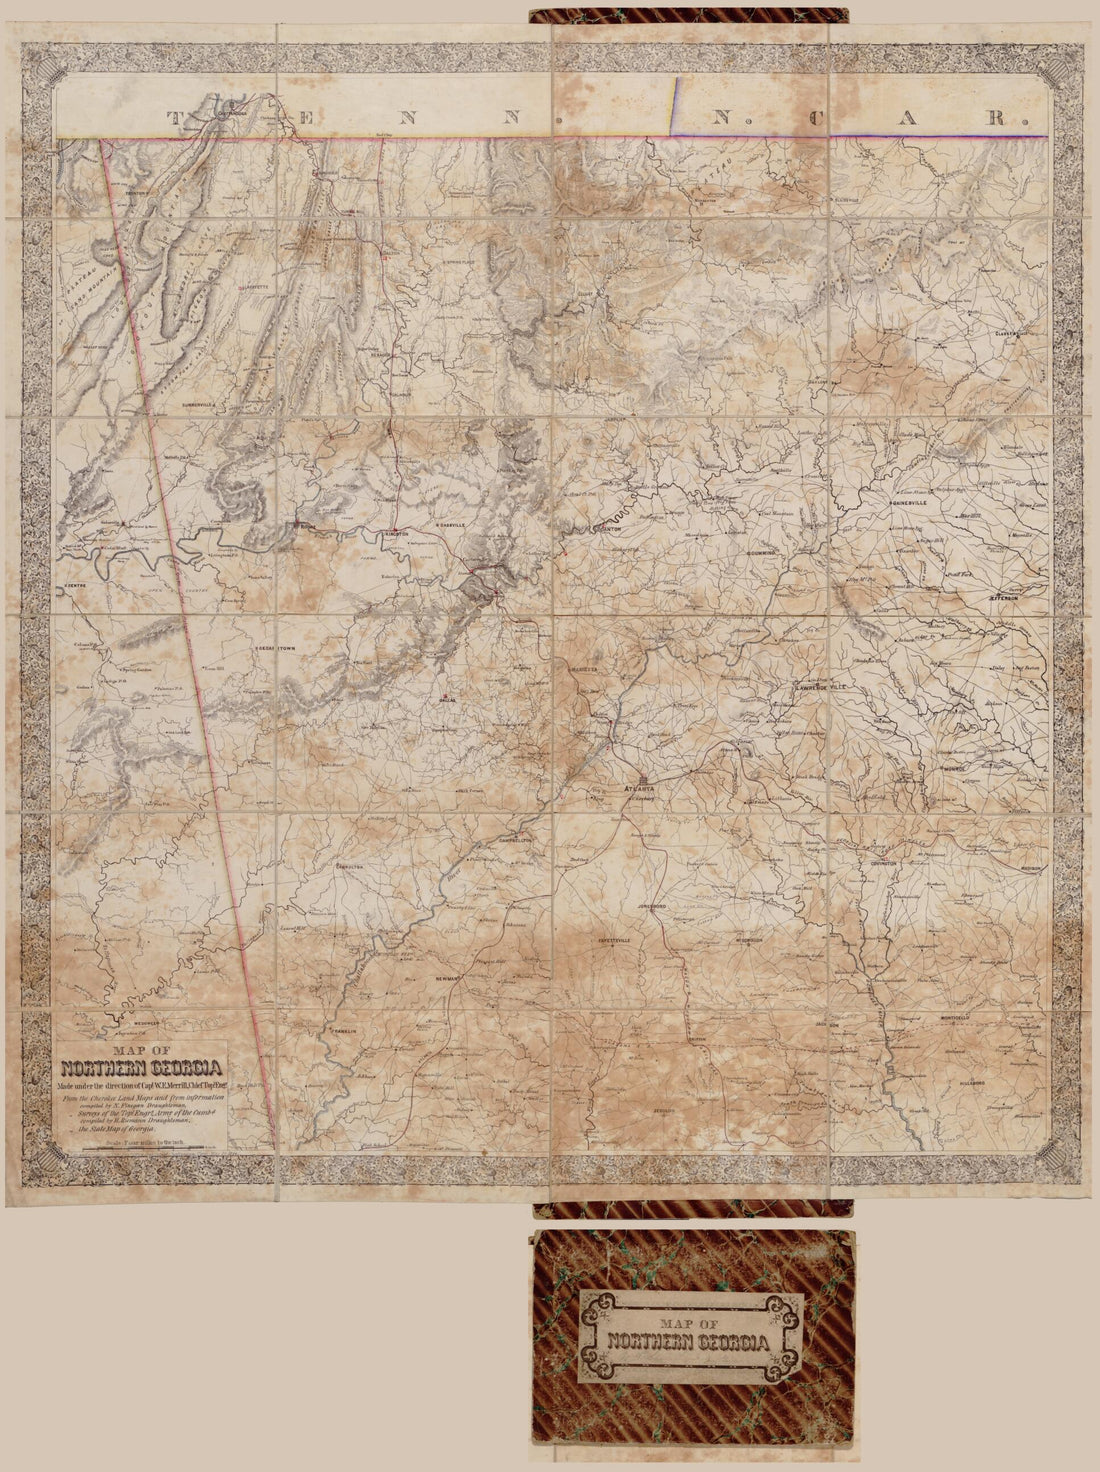 This old map of Map of Northern Georgia from 1864 was created by N. Finegan, W. E. (William Emery) Merrill, H. Riemann,  United States. Army of the Cumberland. Topographical Engineers Office in 1864